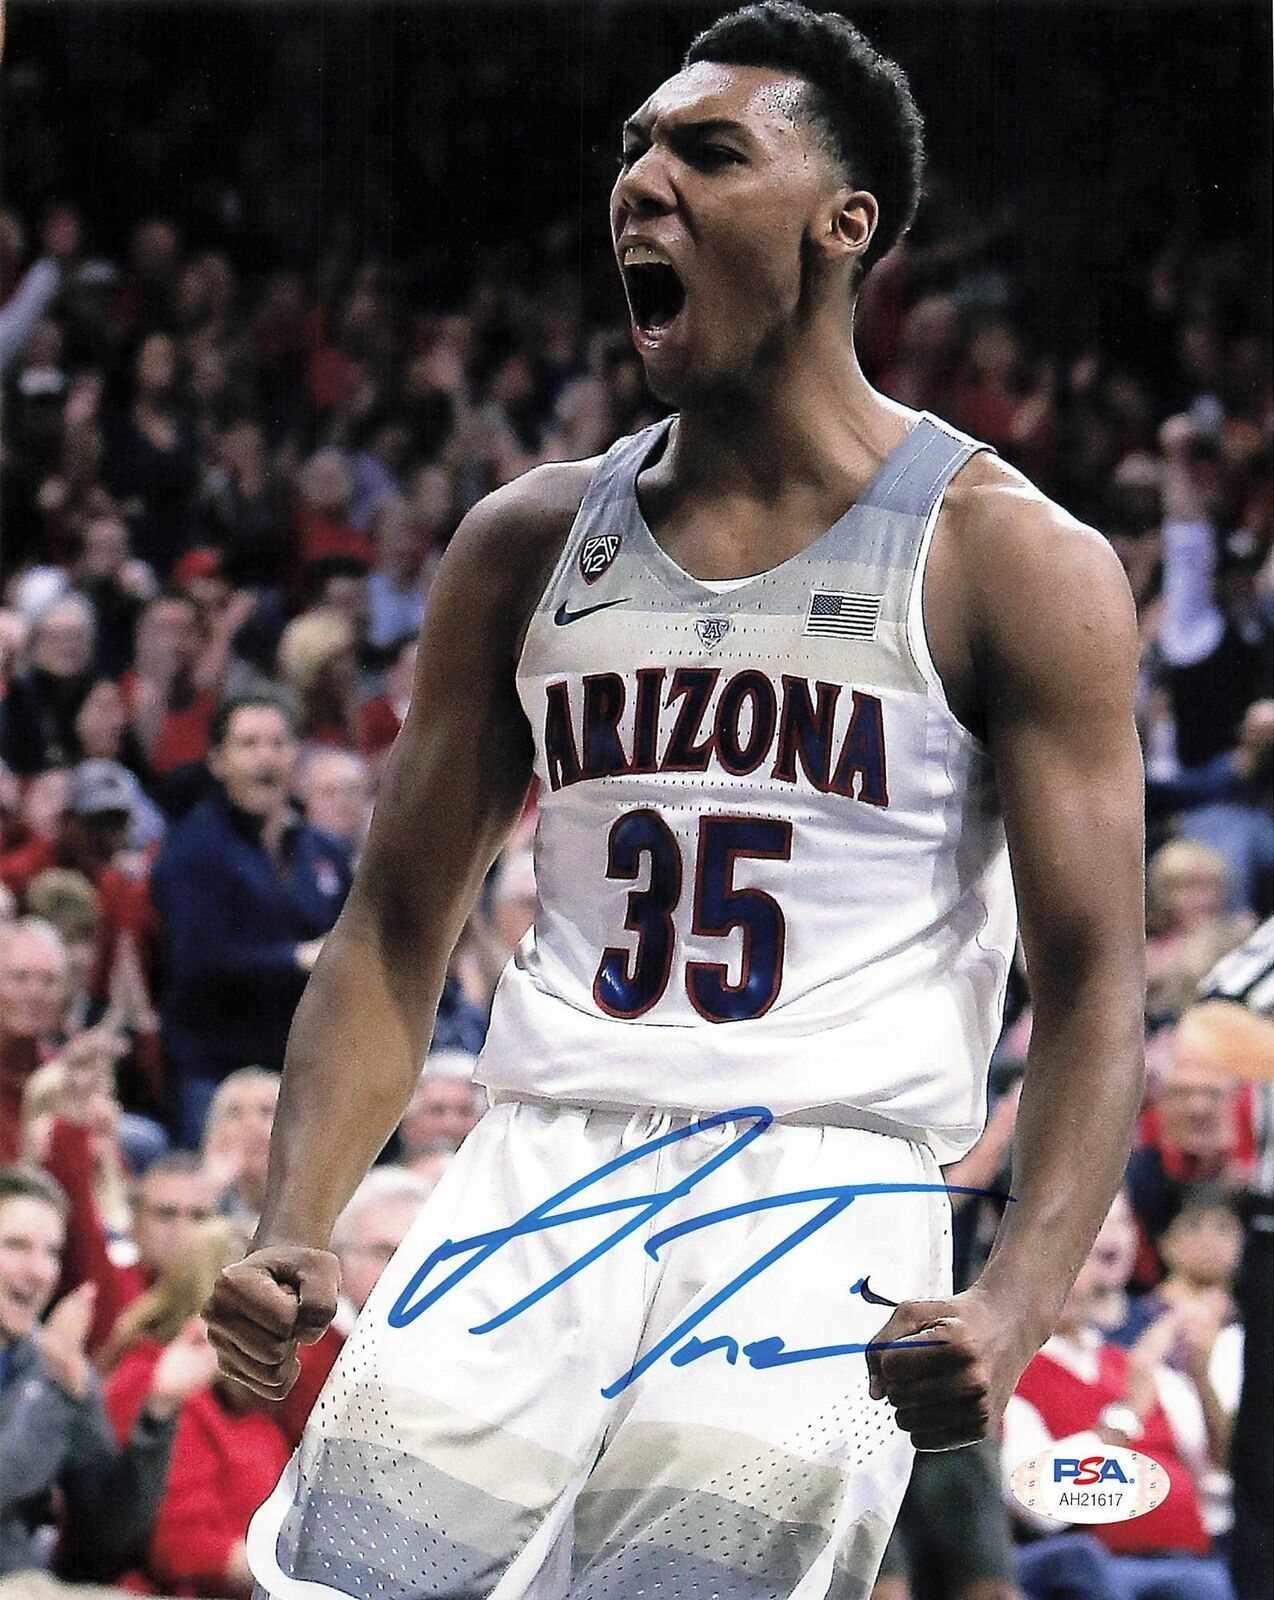 Primary image for Allonzo Trier signed 8x10 photo PSA/DNA Arizona Wildcats Autographed